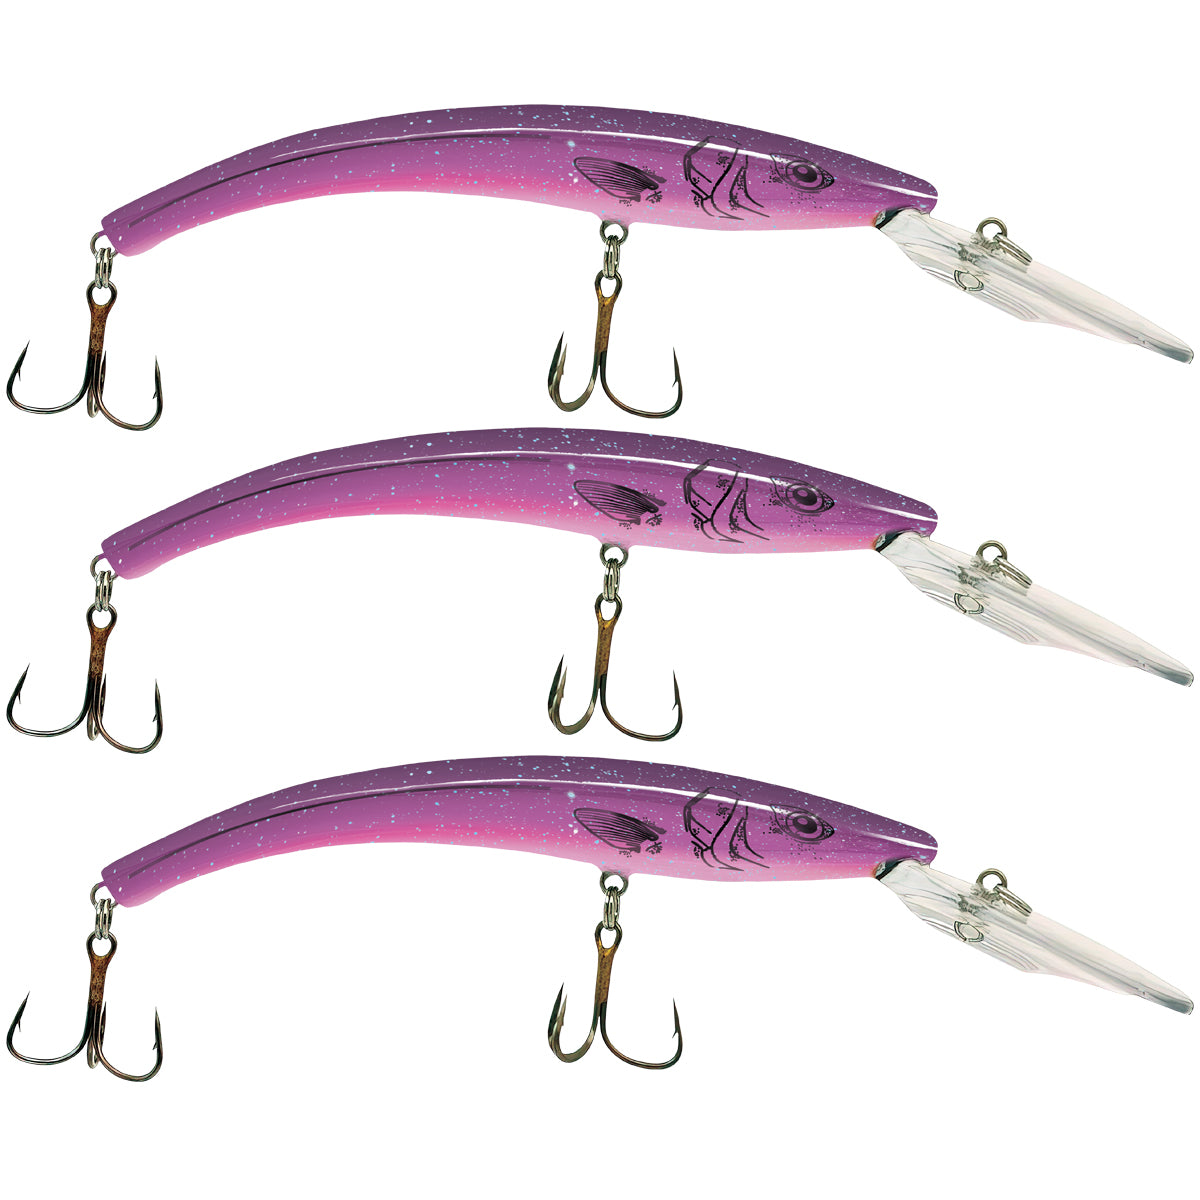 Reef Runner - 8003 Series - Deep Diver 3 Pack - Acme Tackle Company